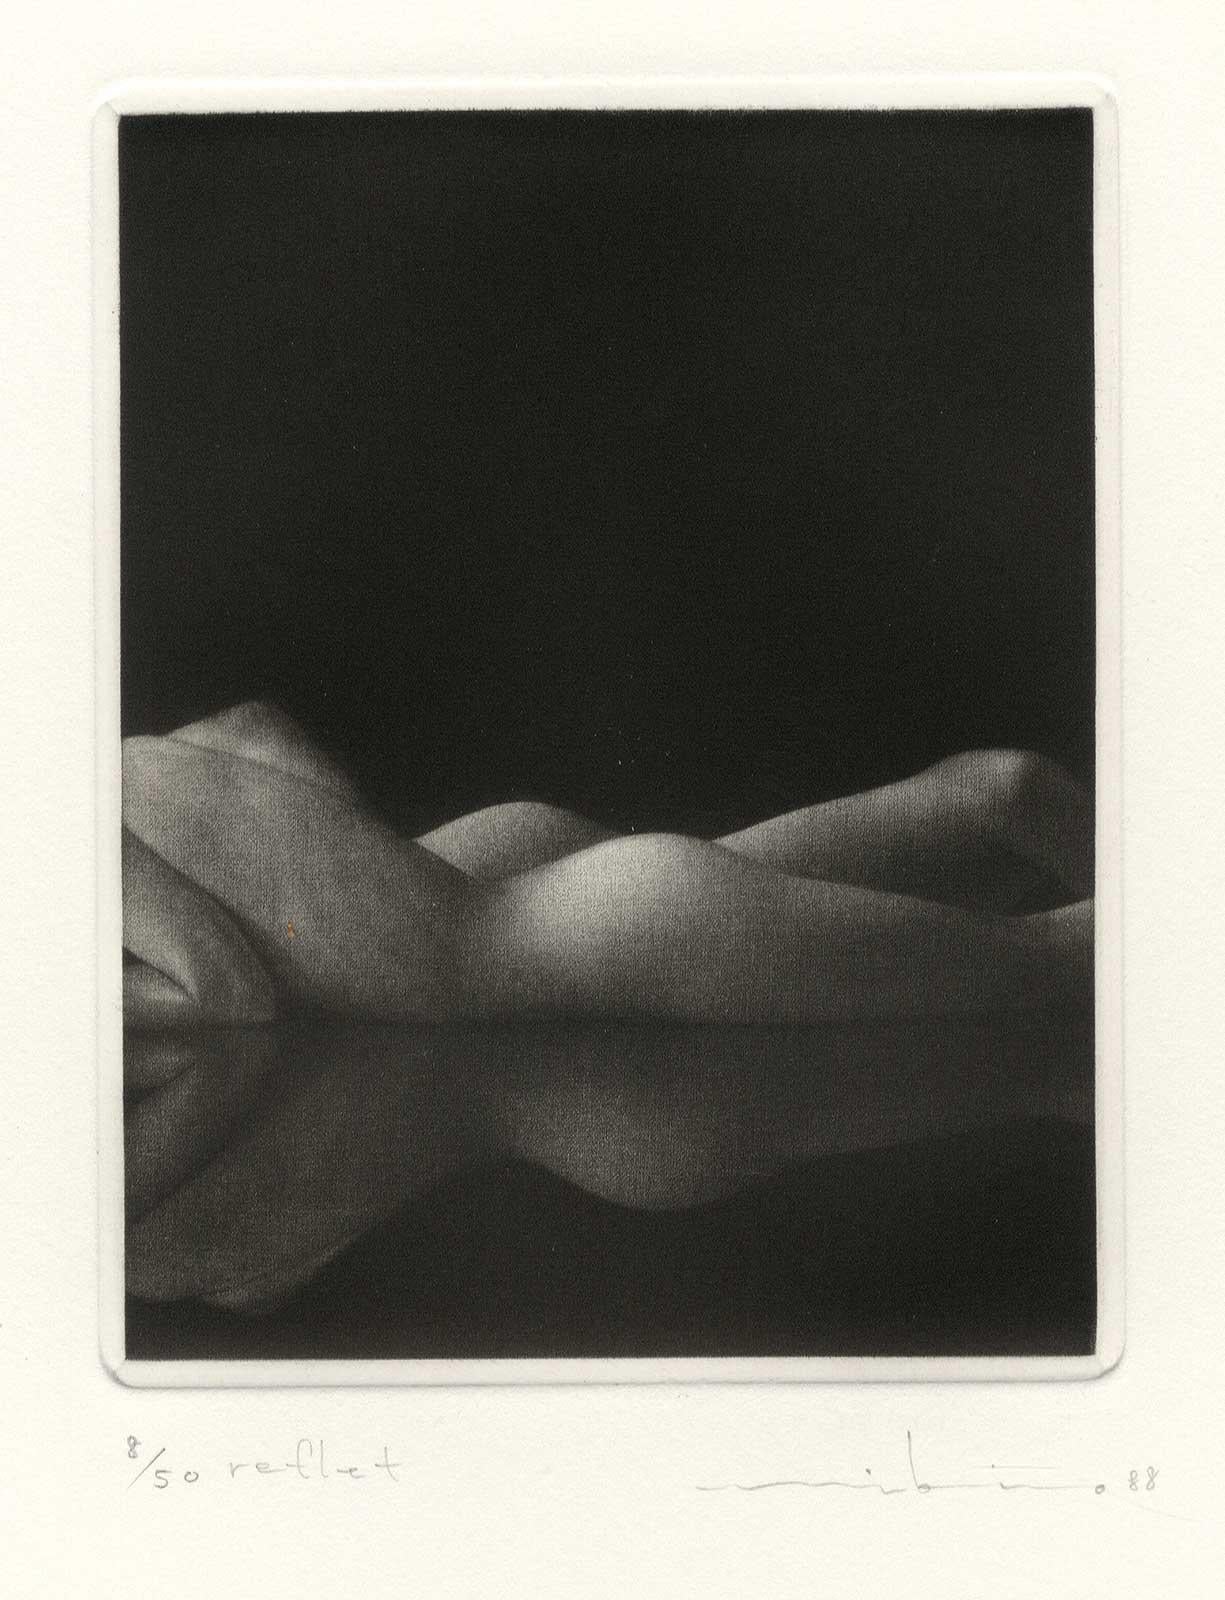 This impression is #8 of 50

Mezzotint artist Mikio Watanabe was born in 1954 in Japan and currently lives in France. He is most known for his elegant, evocative black and white nudes. In these images the artist alternates between full figures and